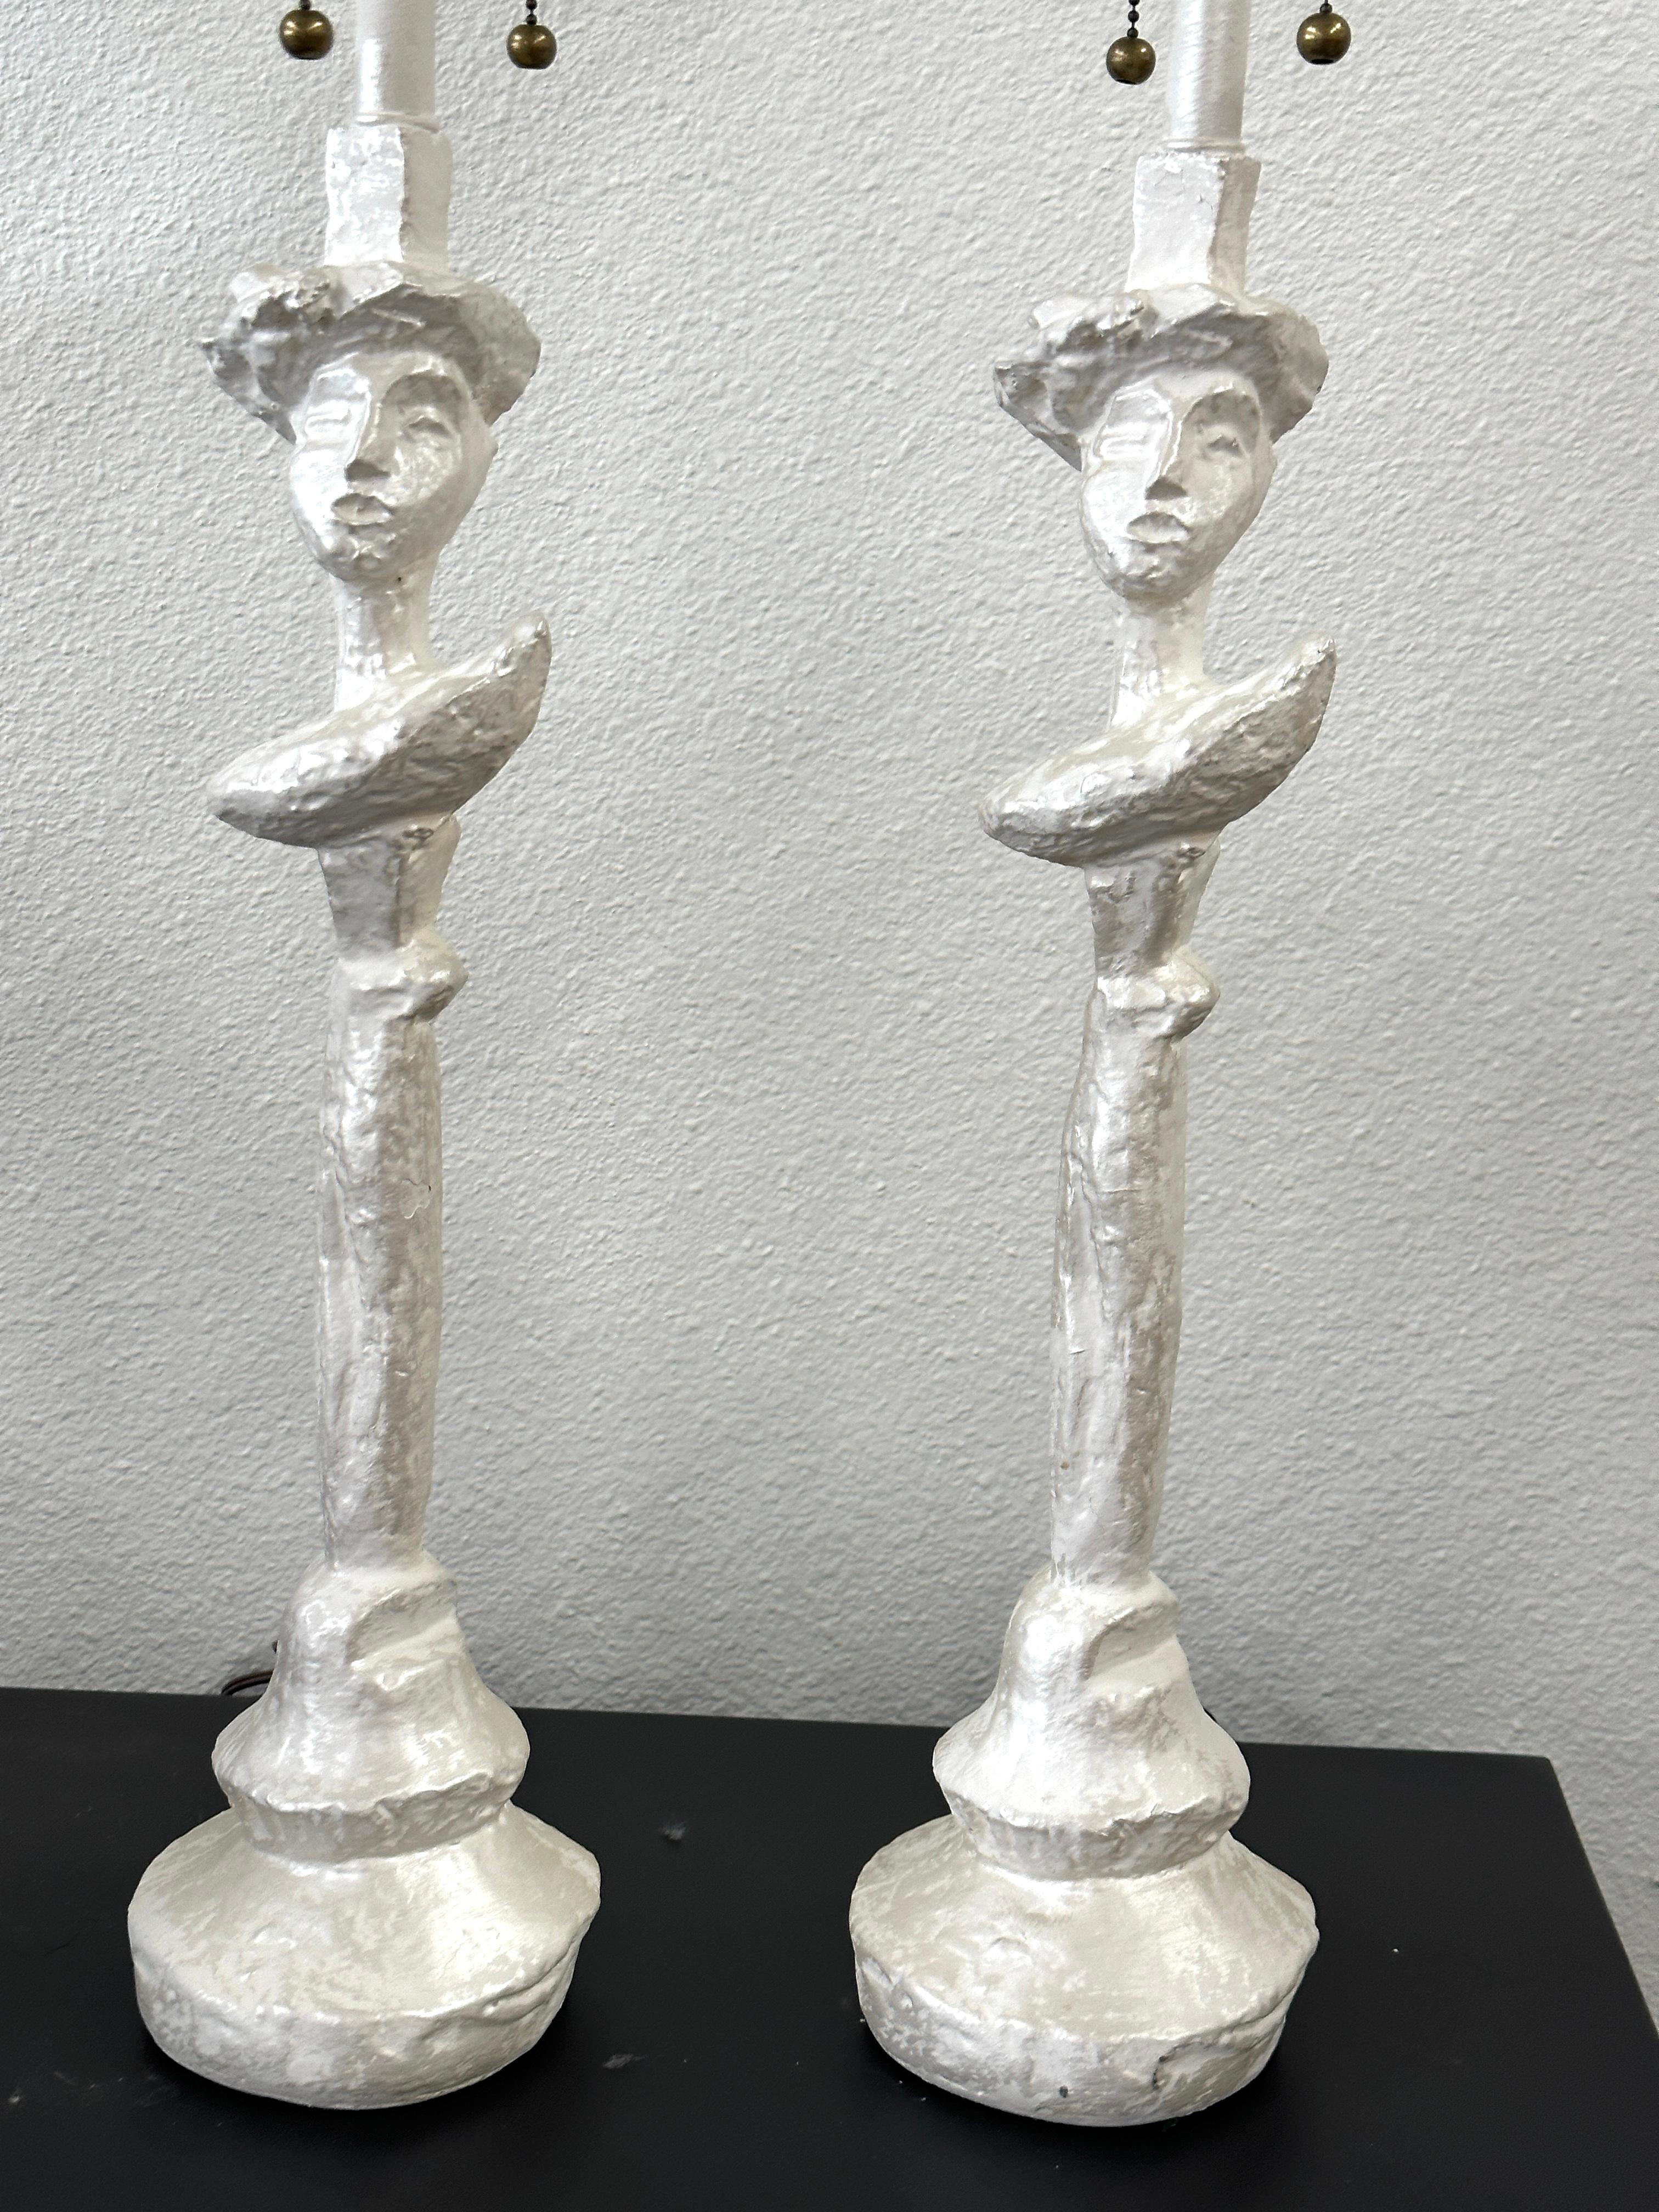 A great pair of plaster after the “Tete de Femme” lamps designed by Giacometti for Syrie Maugham in the 1930’s. These lamps look to be from the 1960’s based on the wiring and electrical fixtures.  We’ve pictured the original as found cords ands